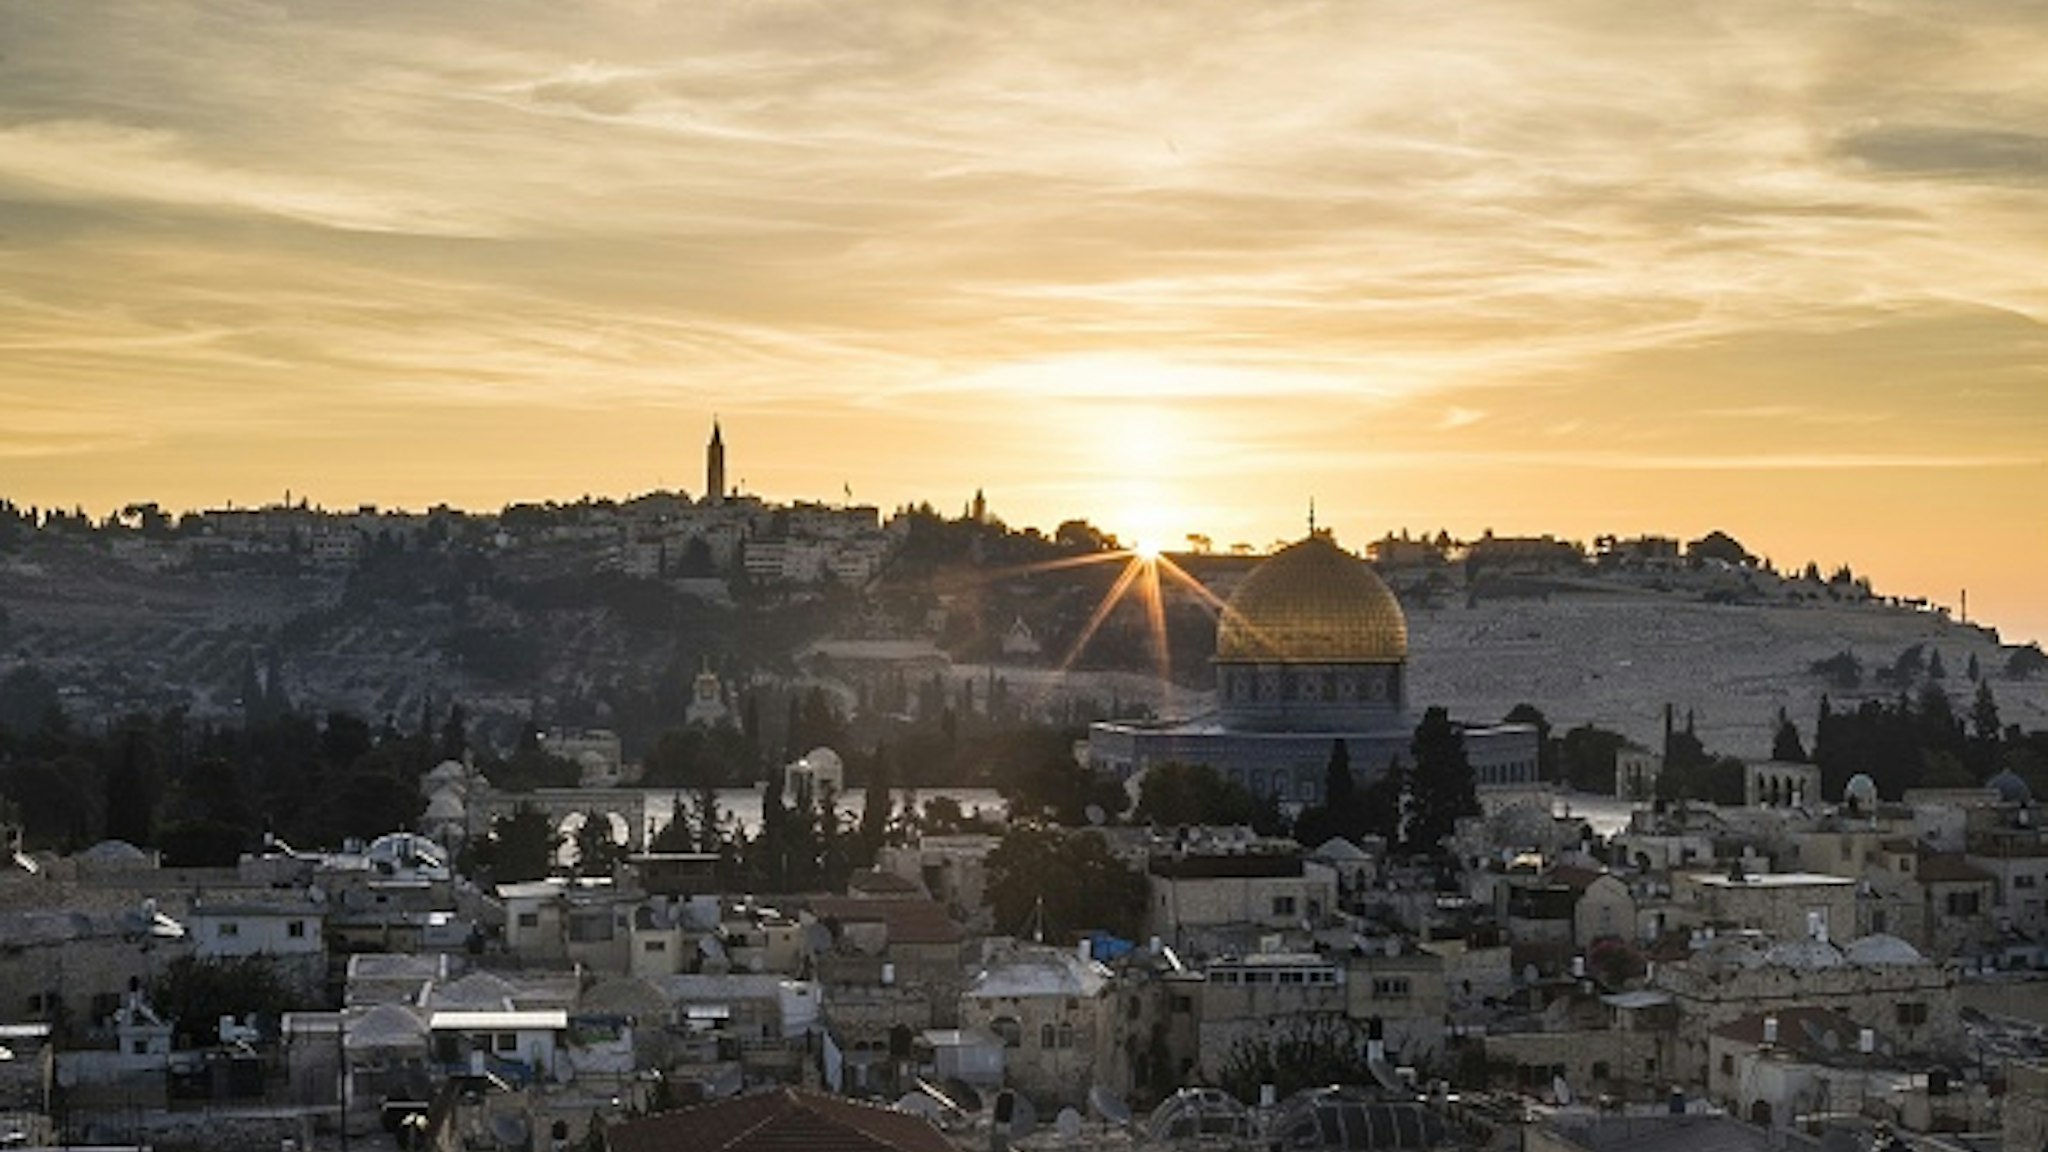 JERUSALEM - (ARCHIVE) : A photo taken by Anadolu Agency photojournalist Mostafa Alkharouf on October 05, 2018 shows Haram al-Sharif (Temple Mount), including Qubbat al-Sakhrah (Dome of the Rock) of Al-Aqsa Mosque Compound during the sunrise in Jerusalem. The Israeli authorities are trying to deport Anadolu Agency photojournalist Mostafa Alkharouf (32), who lives in East Jerusalem, allegedly for not holding a residence permit. Kharouf, has been detained by Israeli forces for 33 days at Israel's Givon Prison. He is being forced to sign the necessary documents to be deported from East Jerusalem to Jordan.